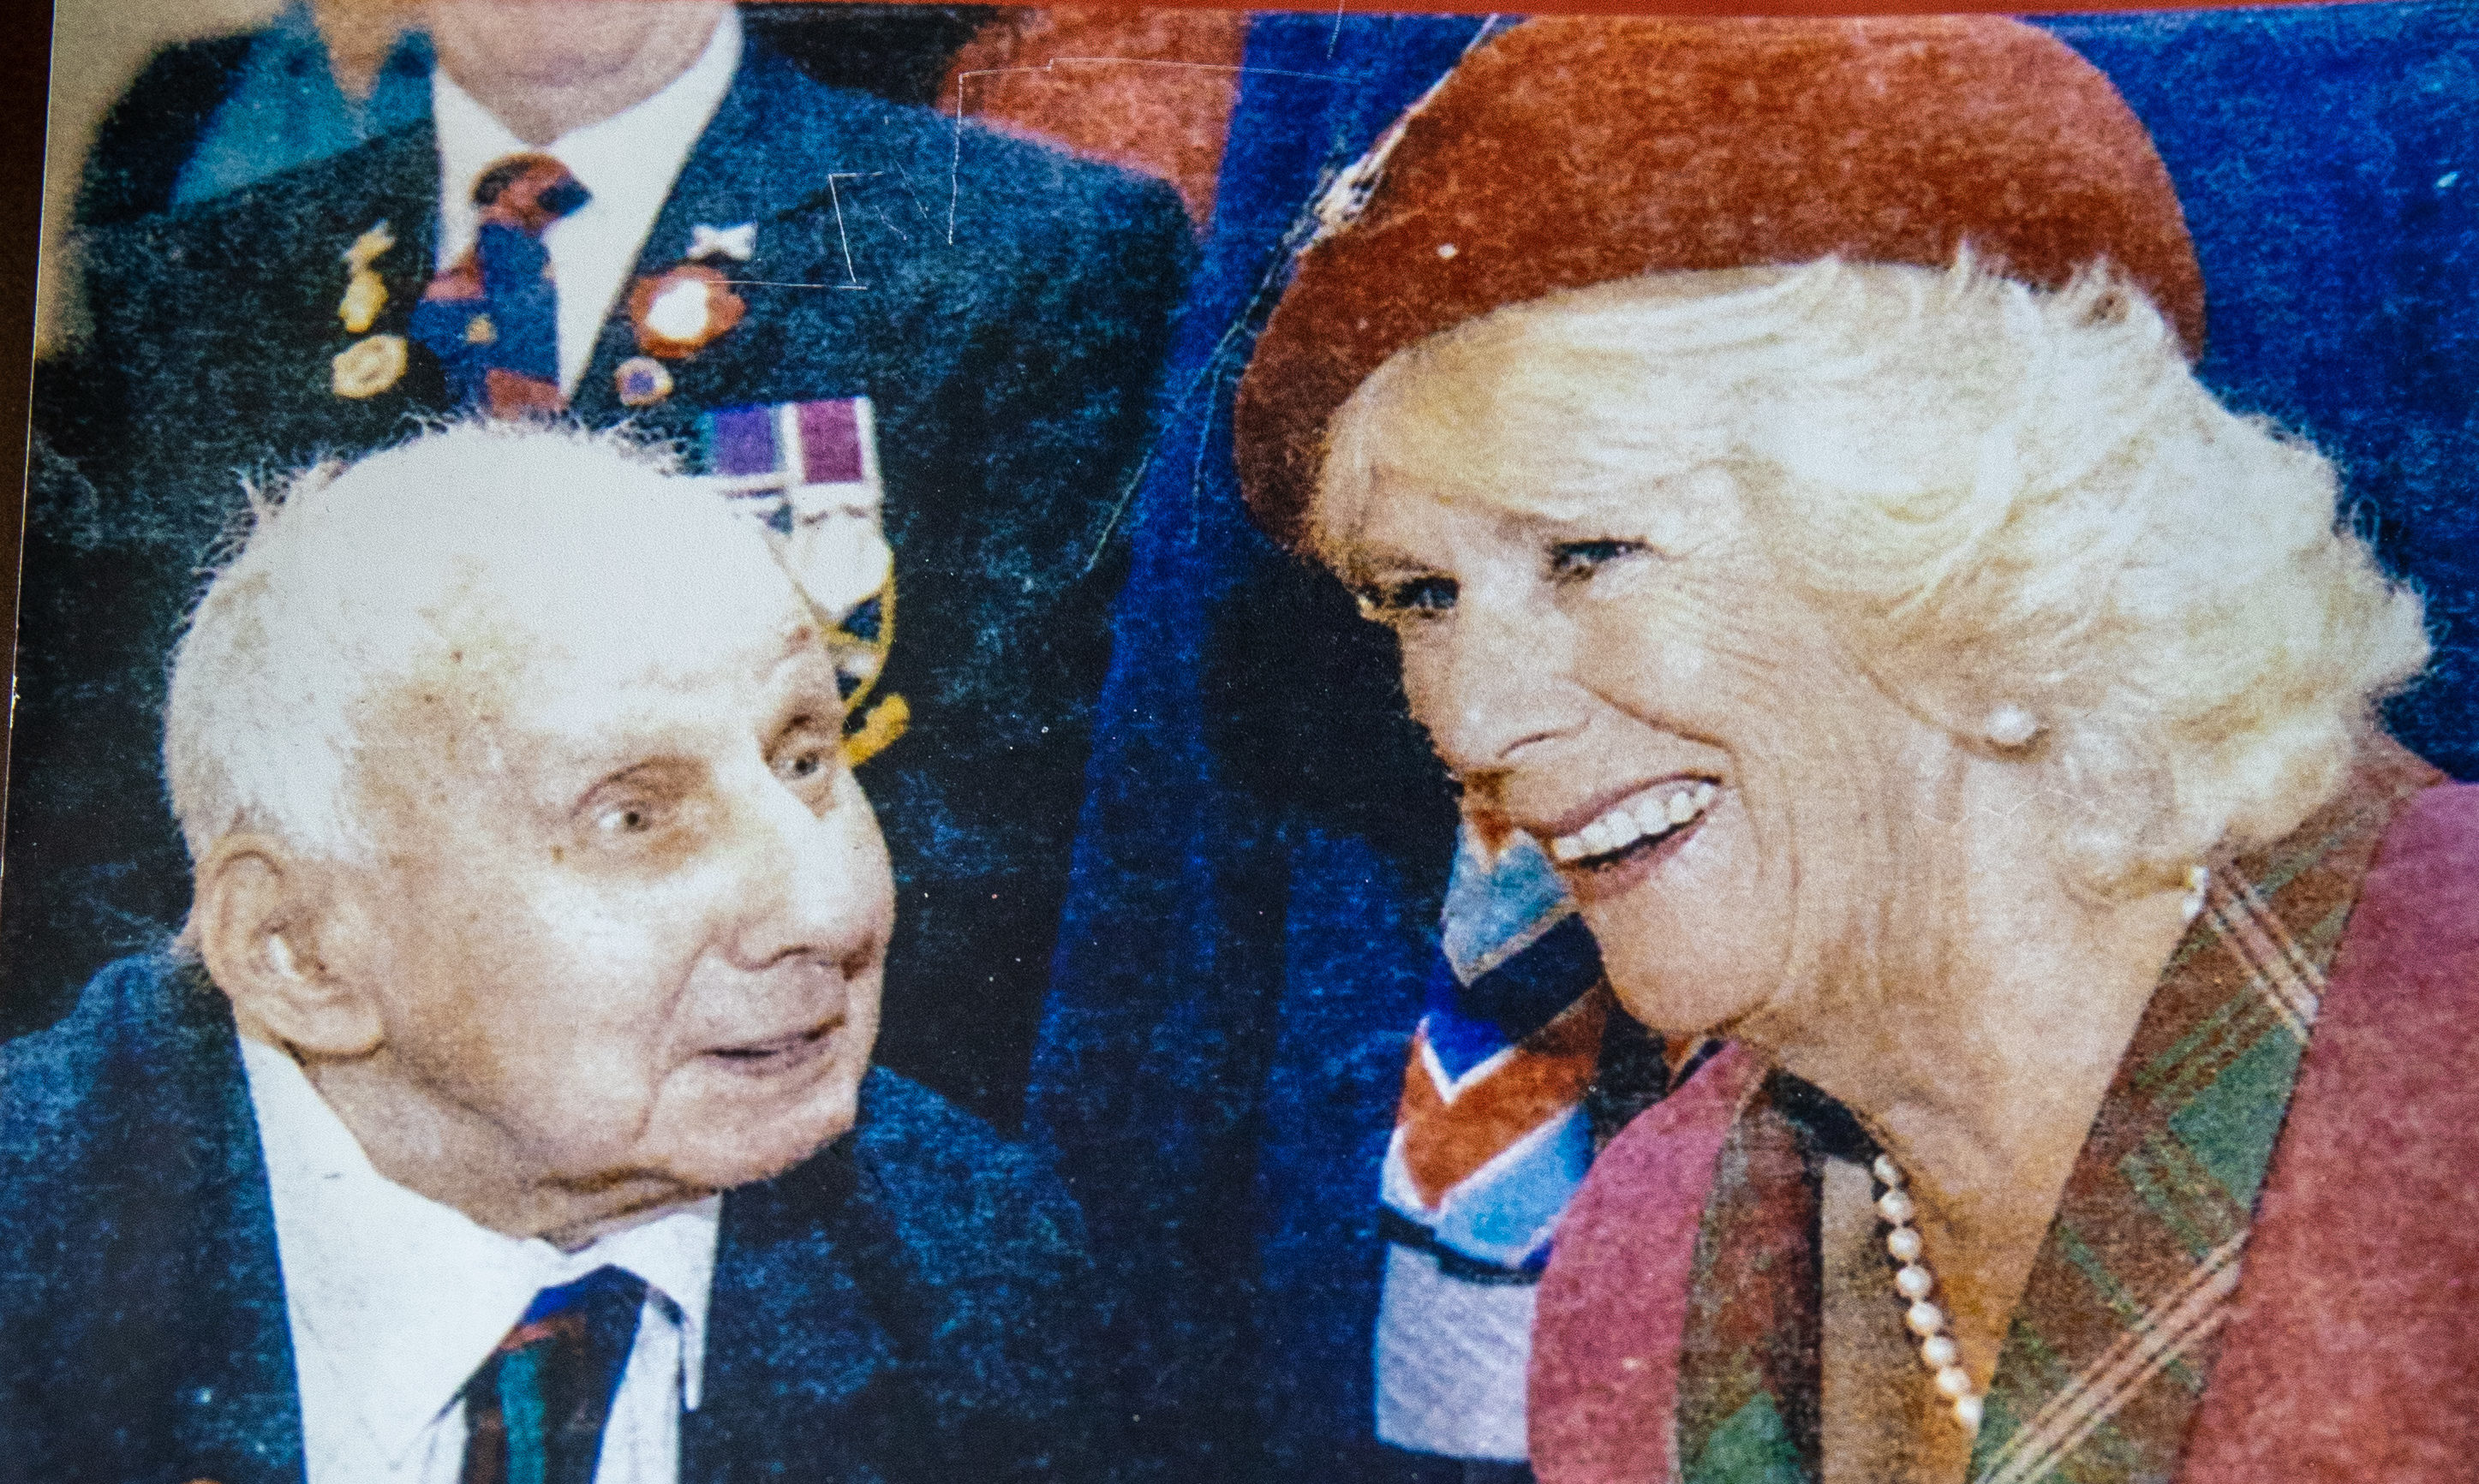 Jimmy Sinclair with Camilla Duchess of Cornwall